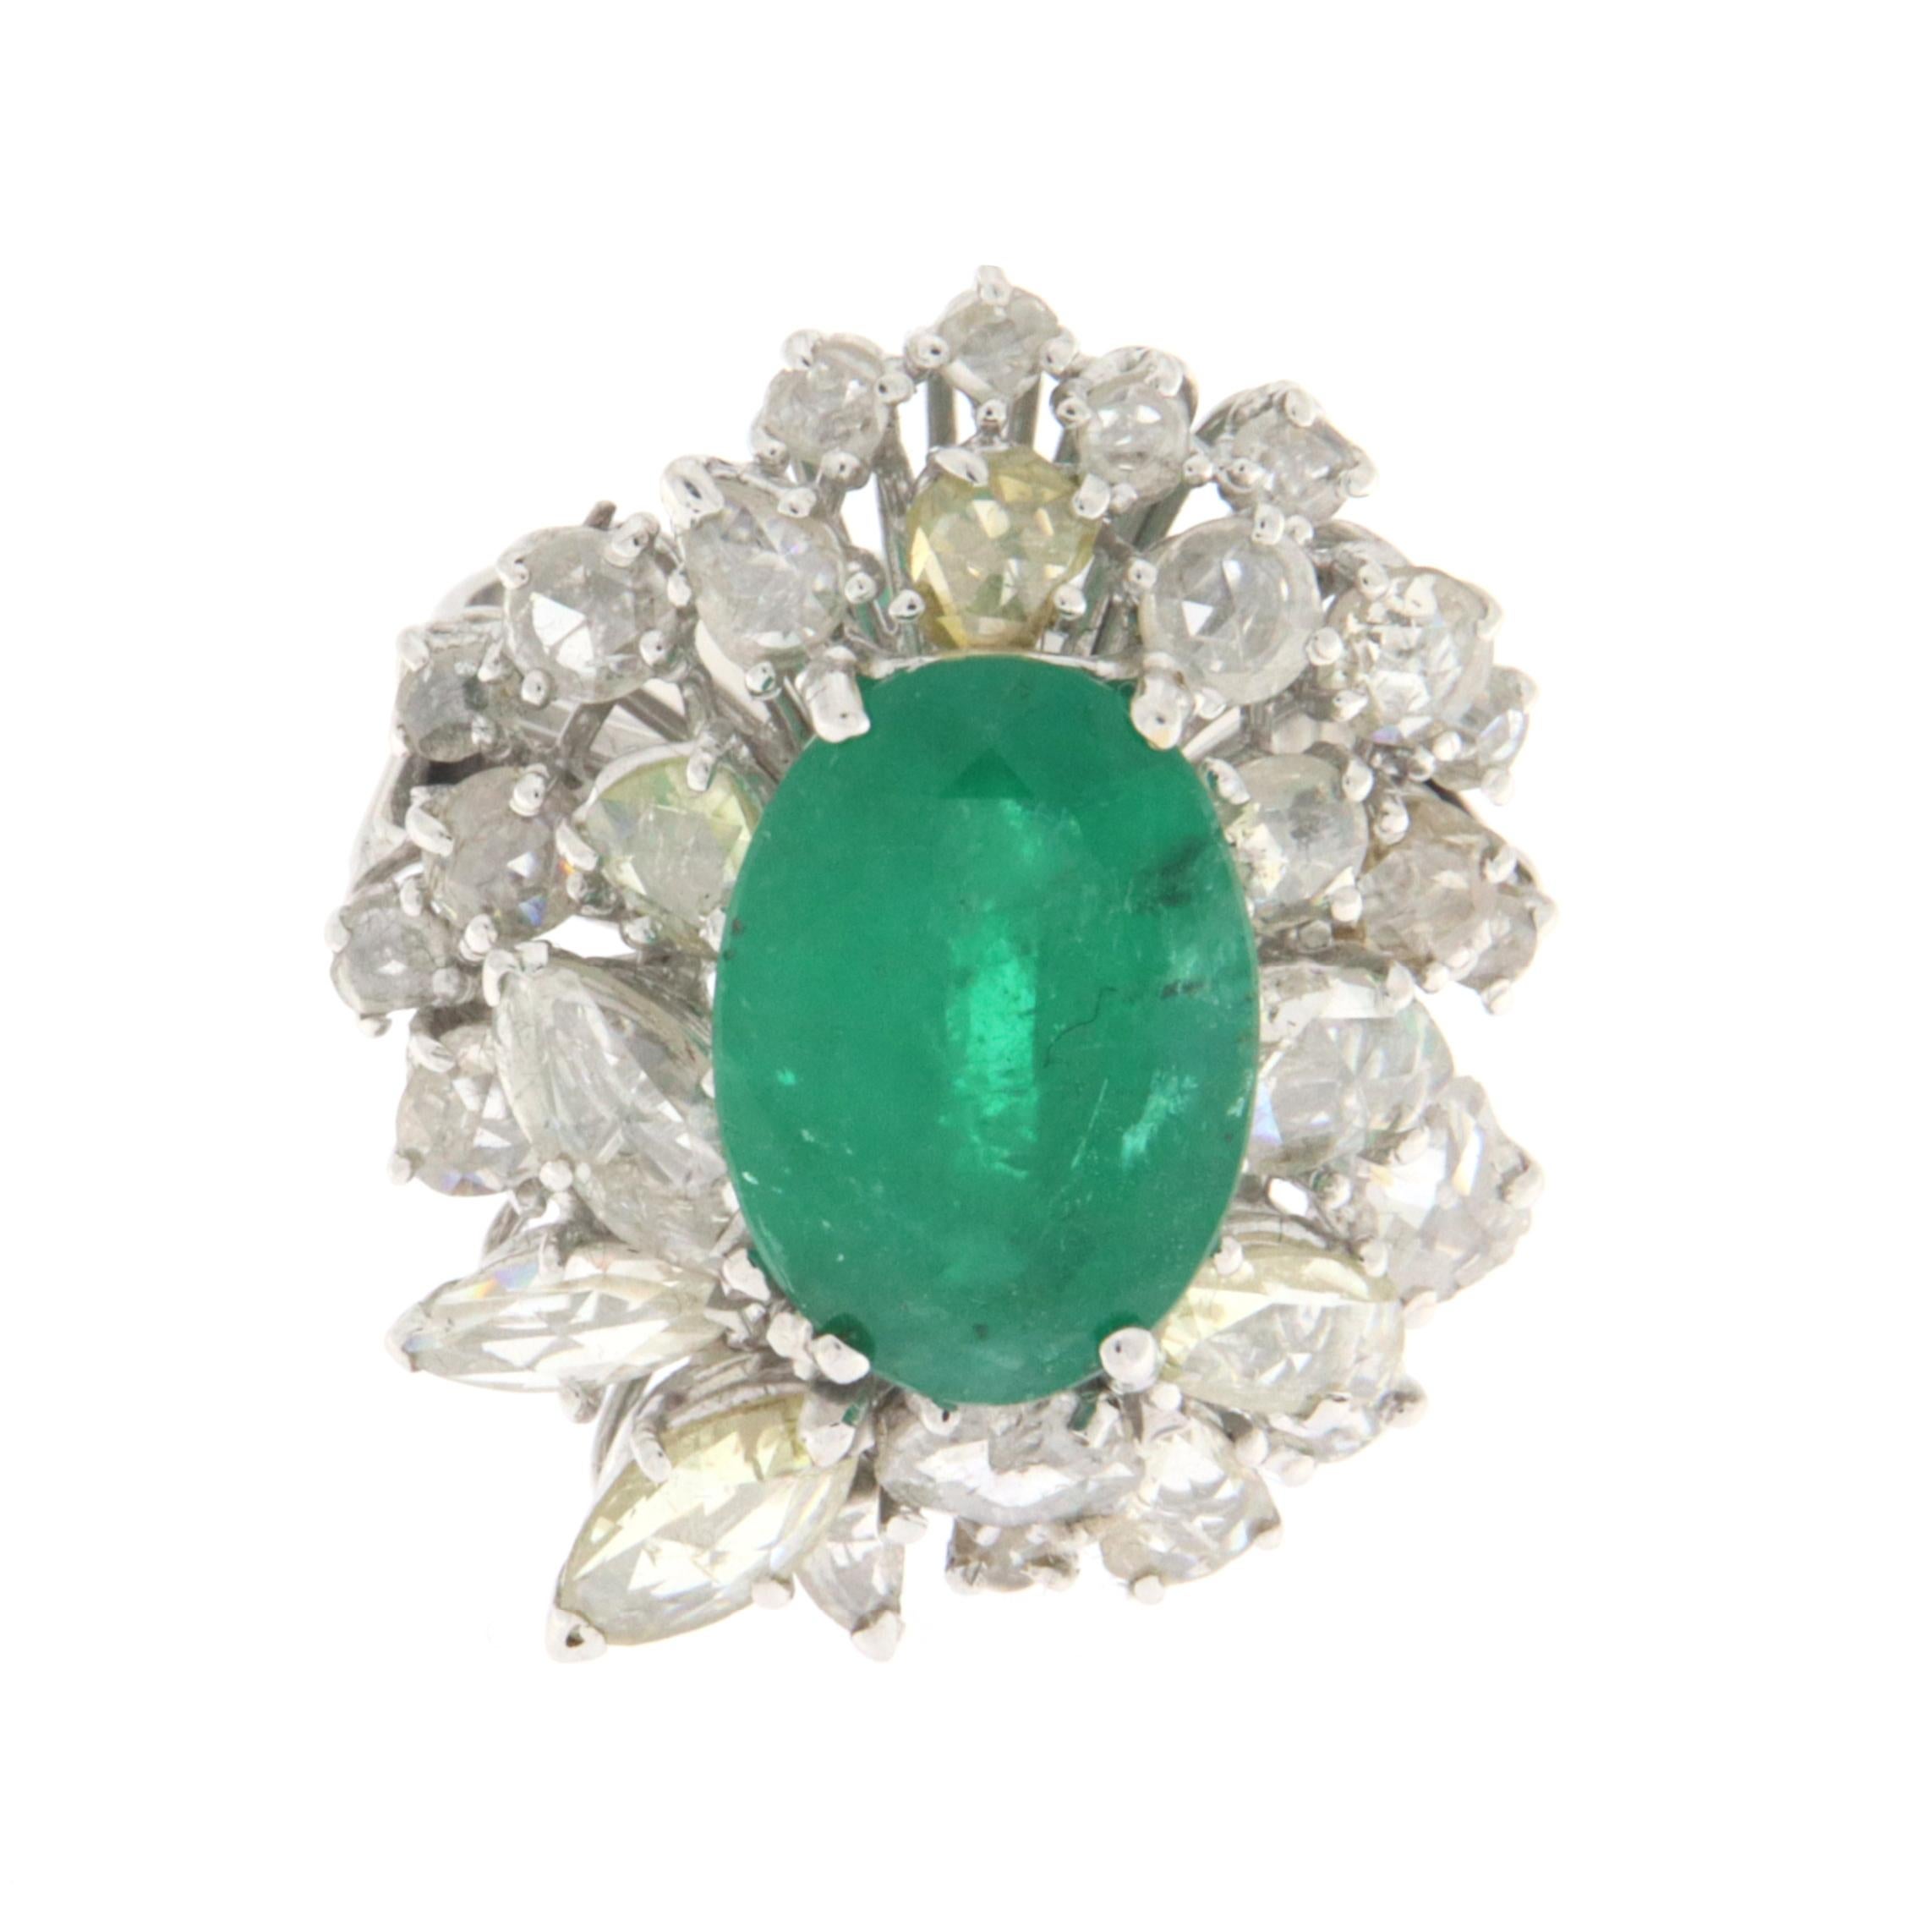 
This 18-karat white gold ring is a tribute to sophistication and timeless elegance. At its heart sits a deep green natural emerald, symbolizing renewal and harmony, set to capture and reflect light with vivid intensity. Surrounded by exceptionally